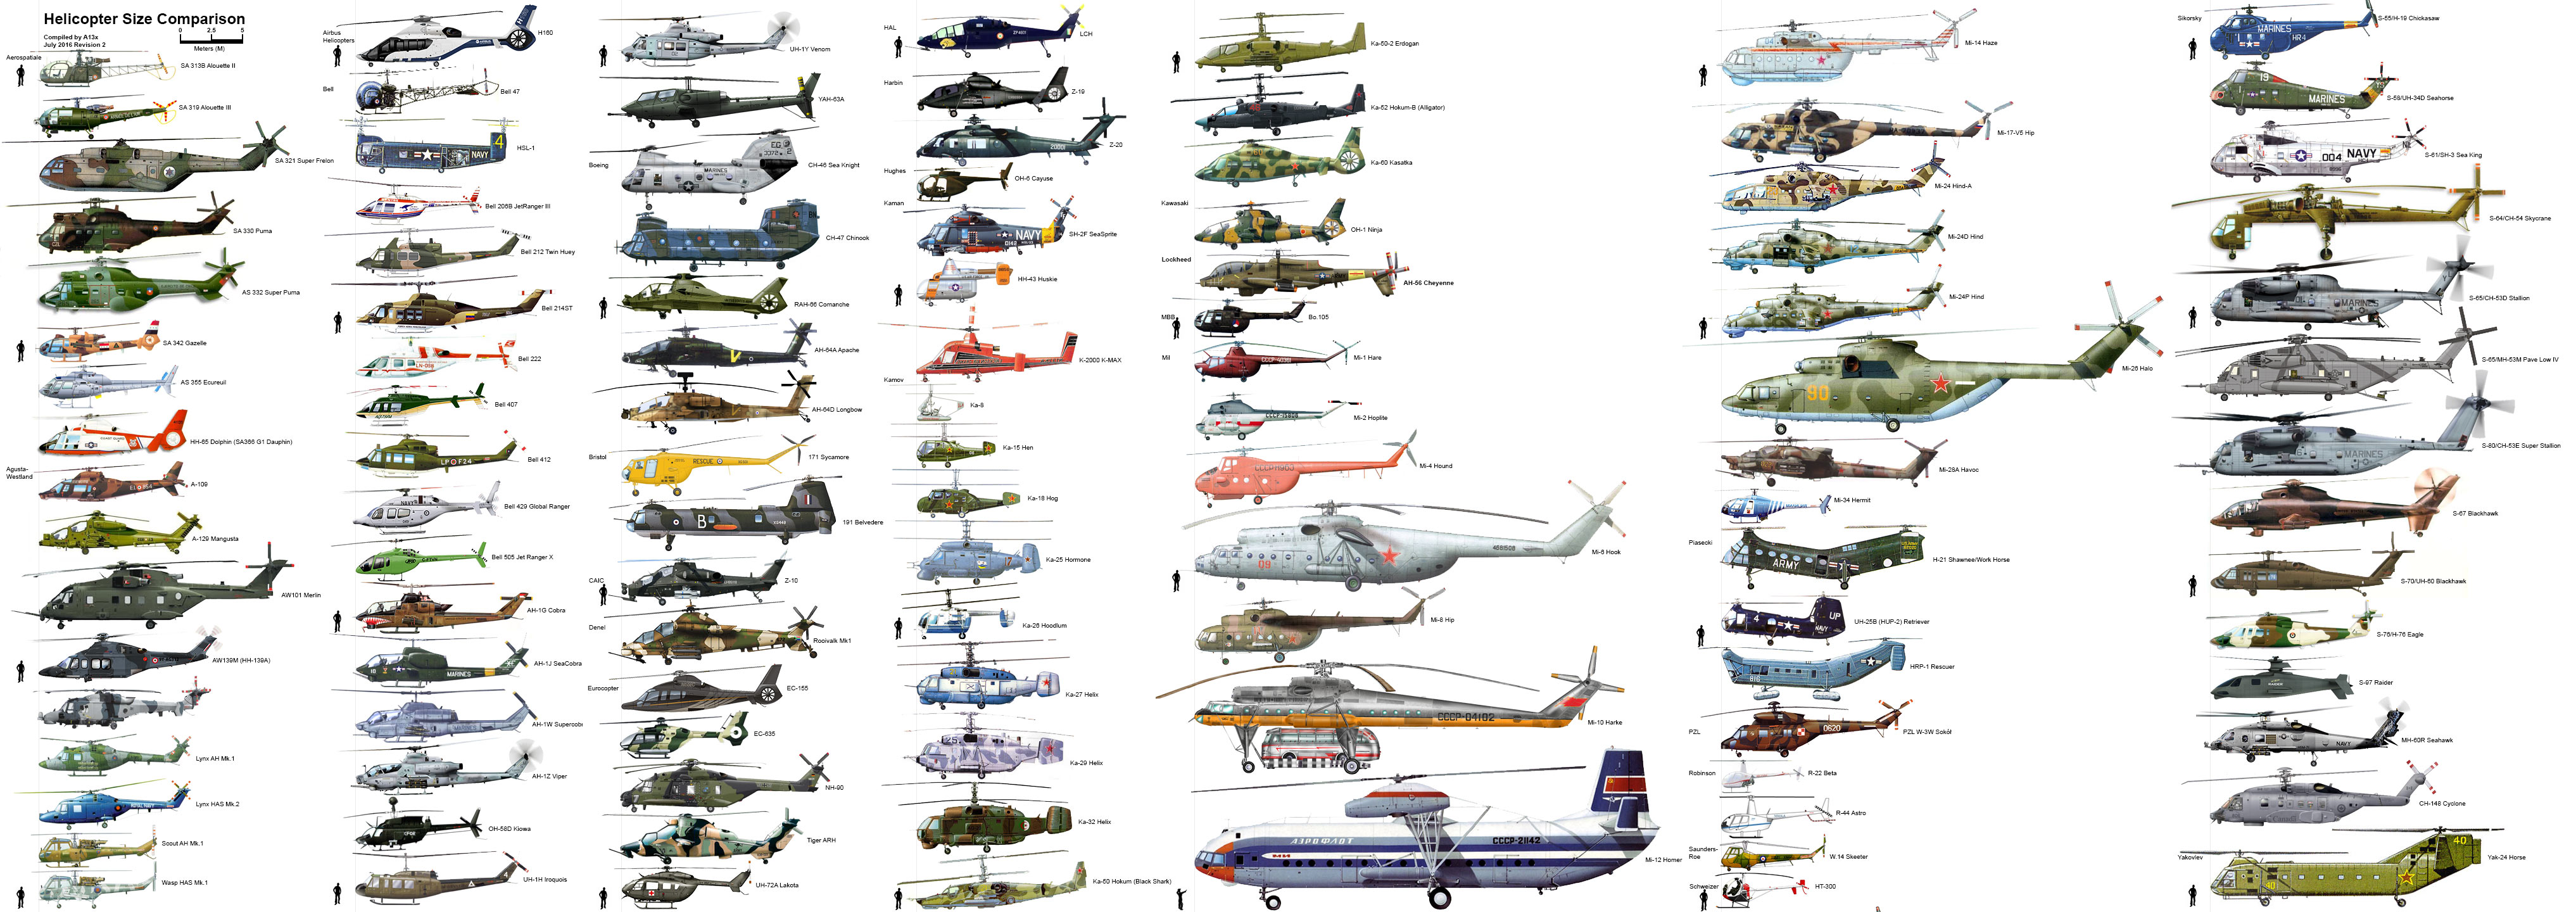 Helicopter Comparison Chart